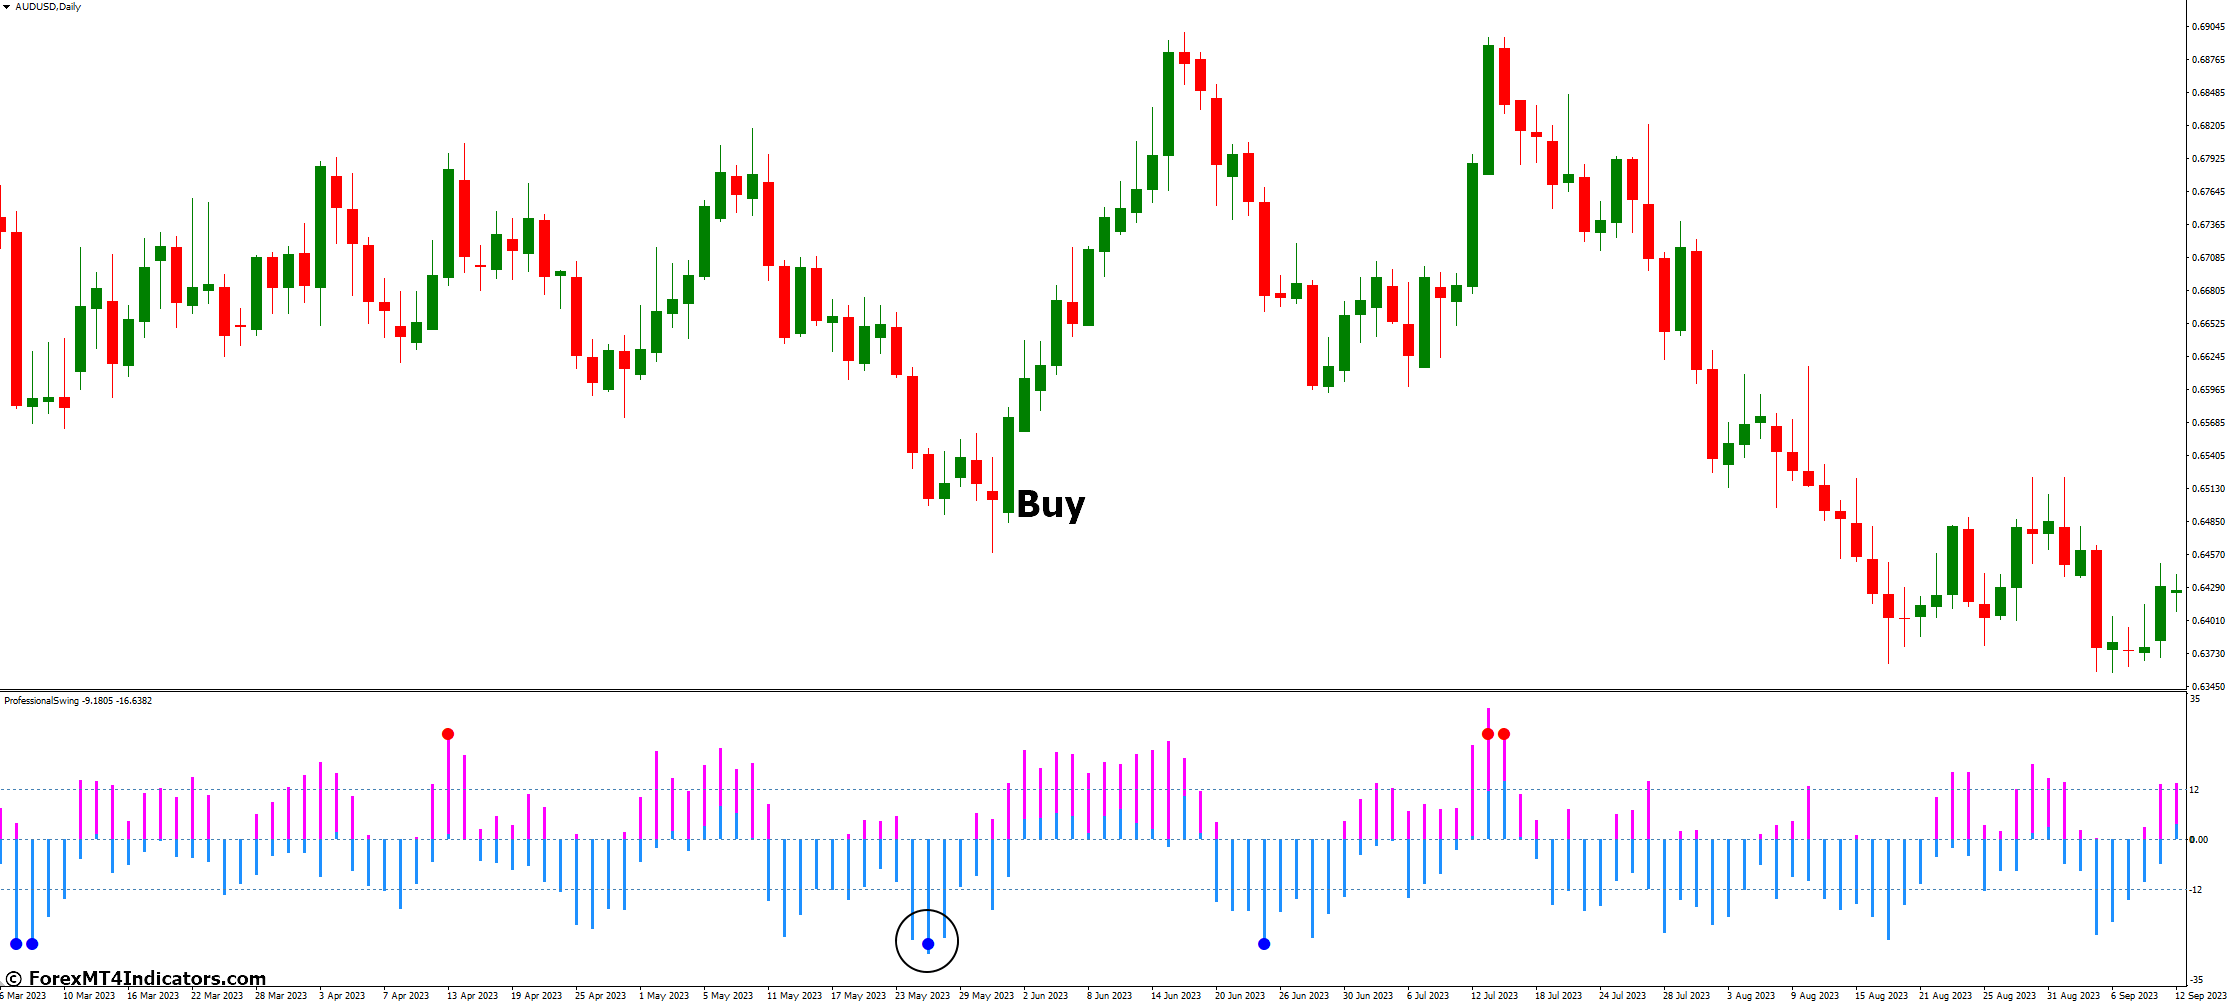 How to Trade with Professional Swing MT4 Indicator - Buy Entry